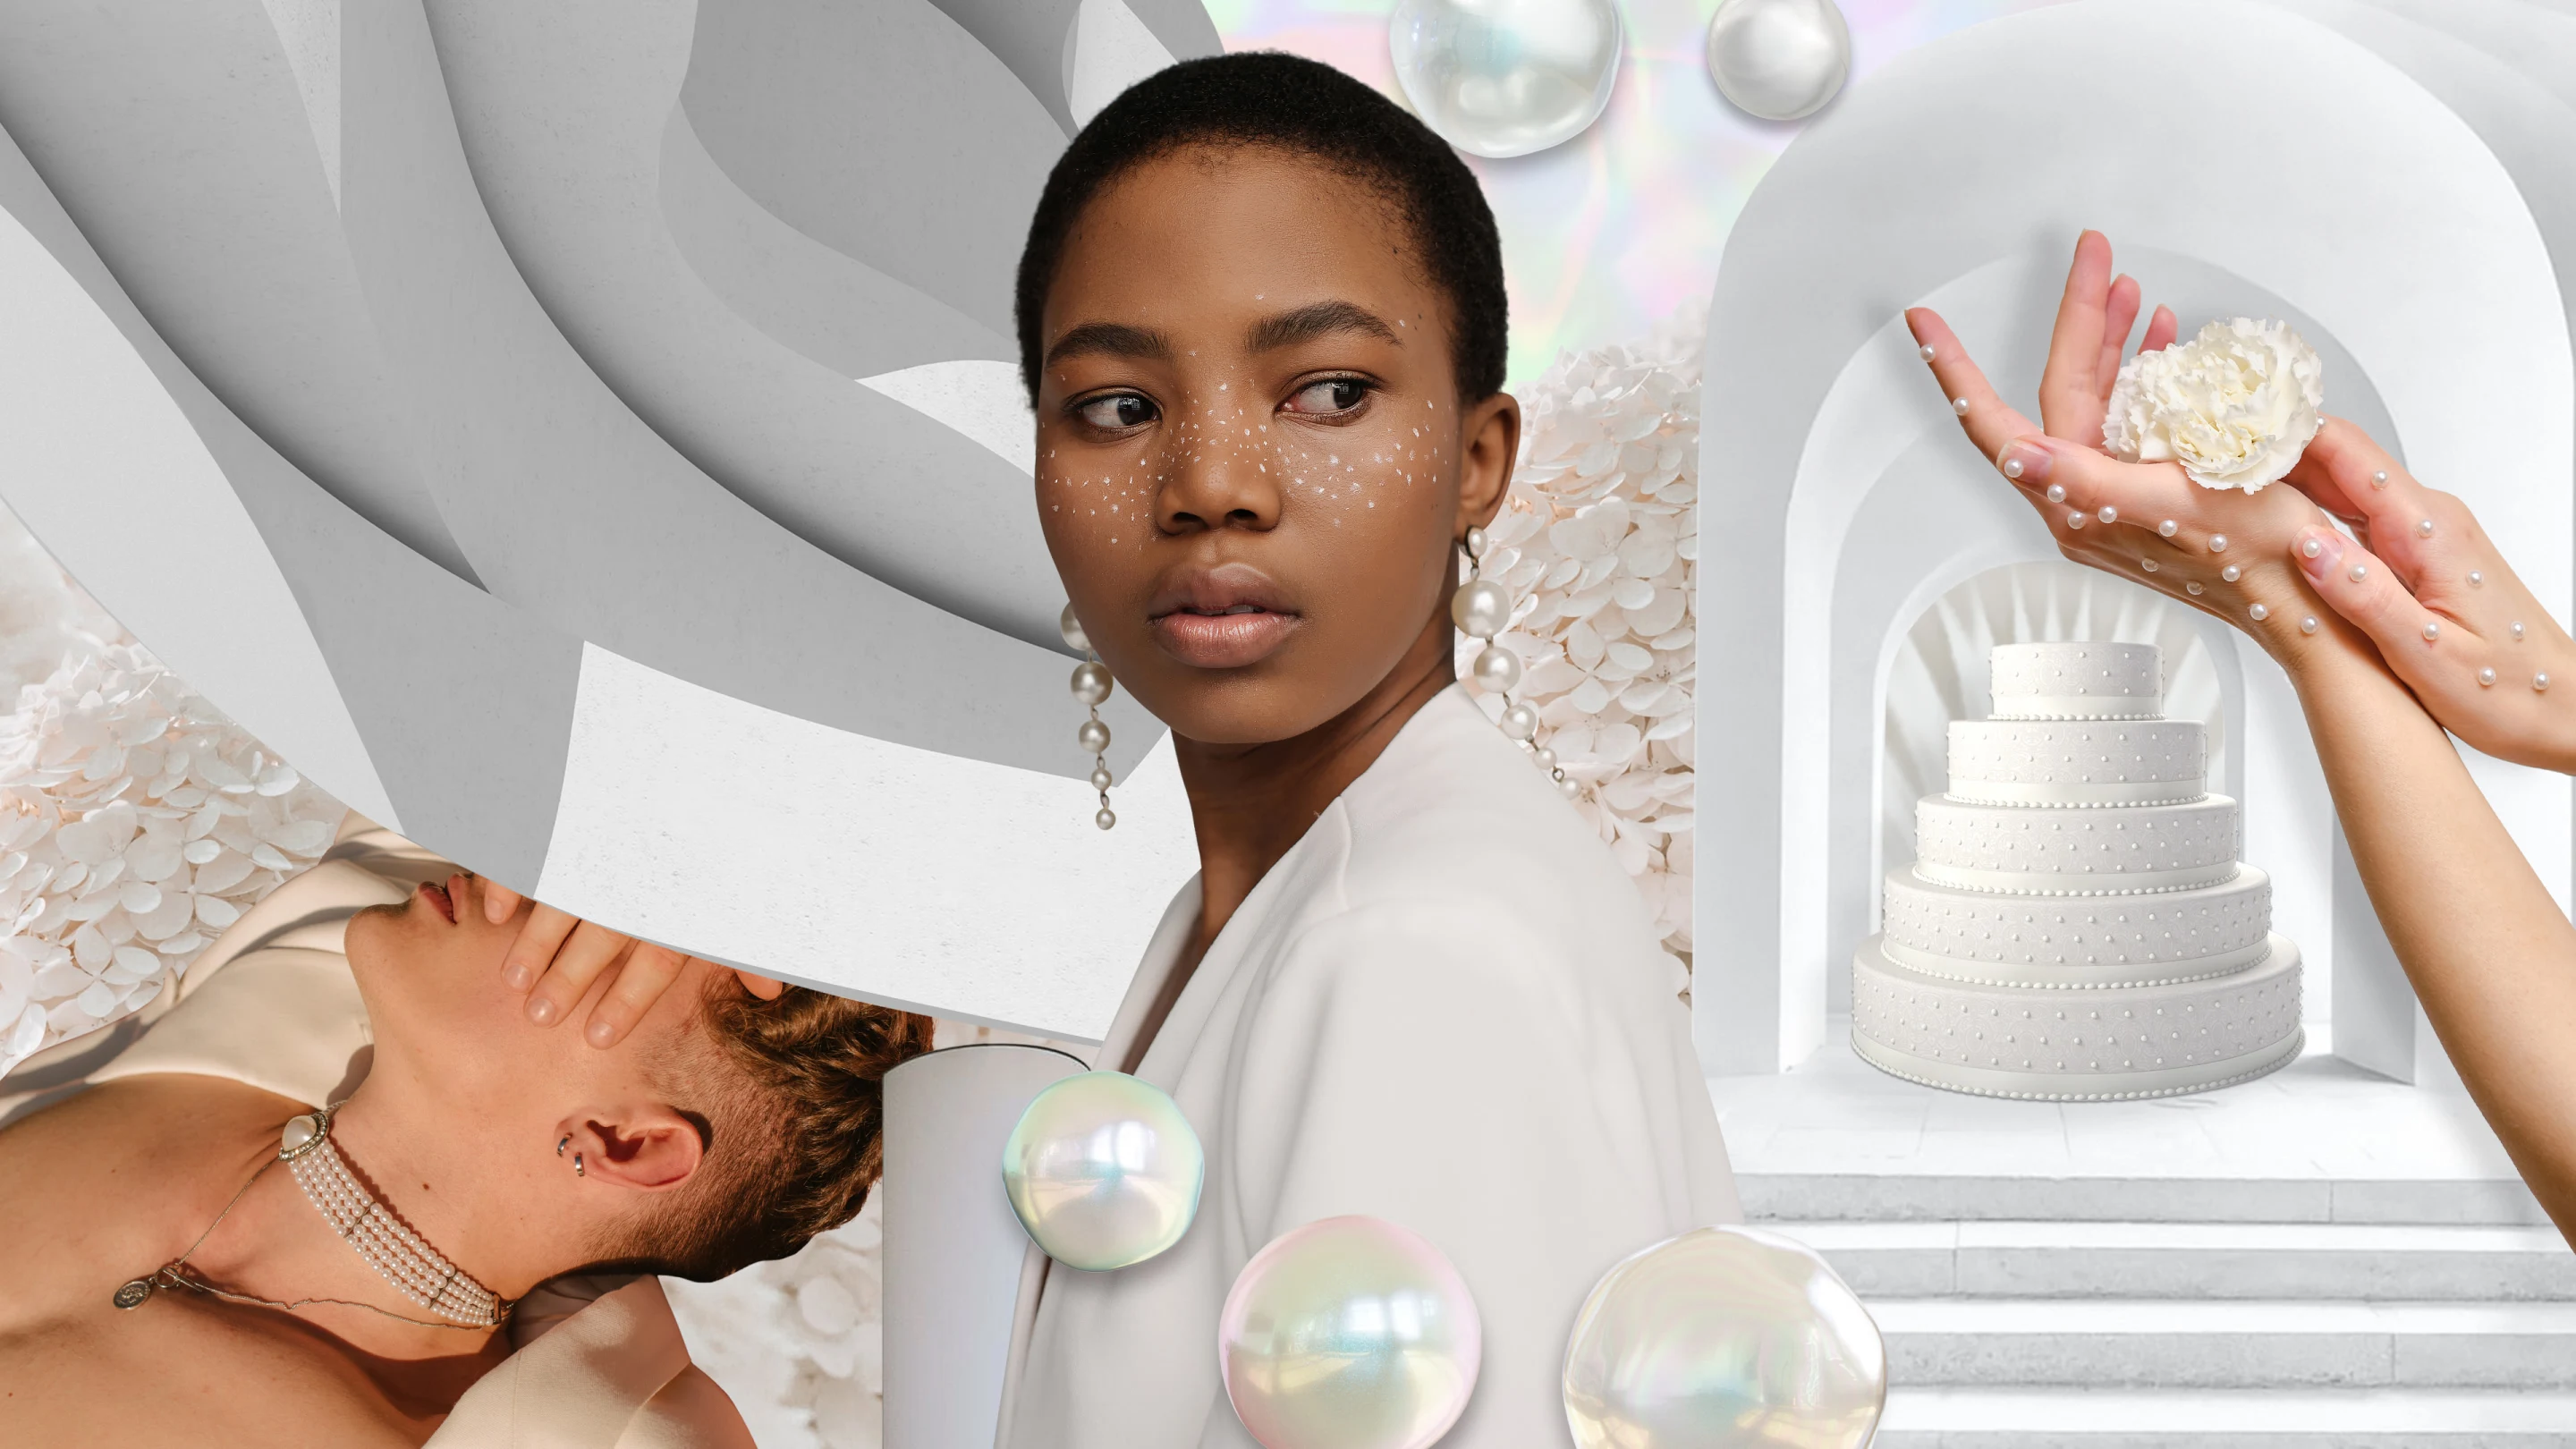 Collage of different people and pearly items. White man wearing a pearl choker necklace. Black woman wearing shimmery makeup and pearl earrings. A wedding cake with pearl details. A hand with pearls holding a white carnation.